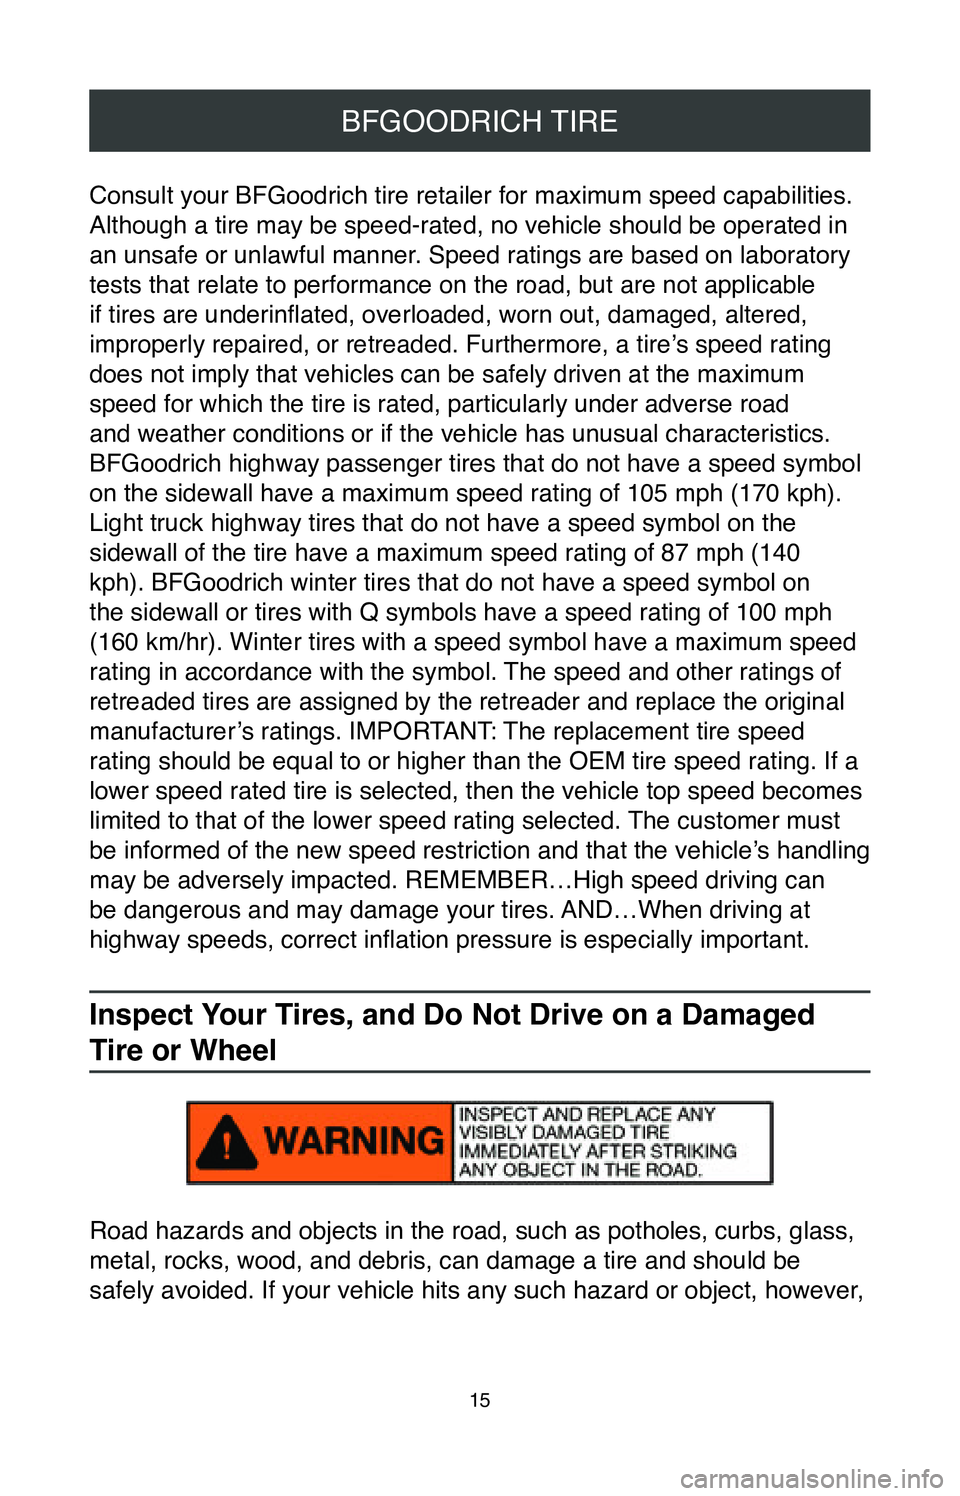 TOYOTA RAV4 2020  Warranties & Maintenance Guides (in English) 15
BFGOODRICH TIRE
Consult your BFGoodrich tire retailer for maximum speed capabilities. 
Although a tire may be speed-rated, no vehicle should be operated in 
an unsafe or unlawful manner. Speed rati